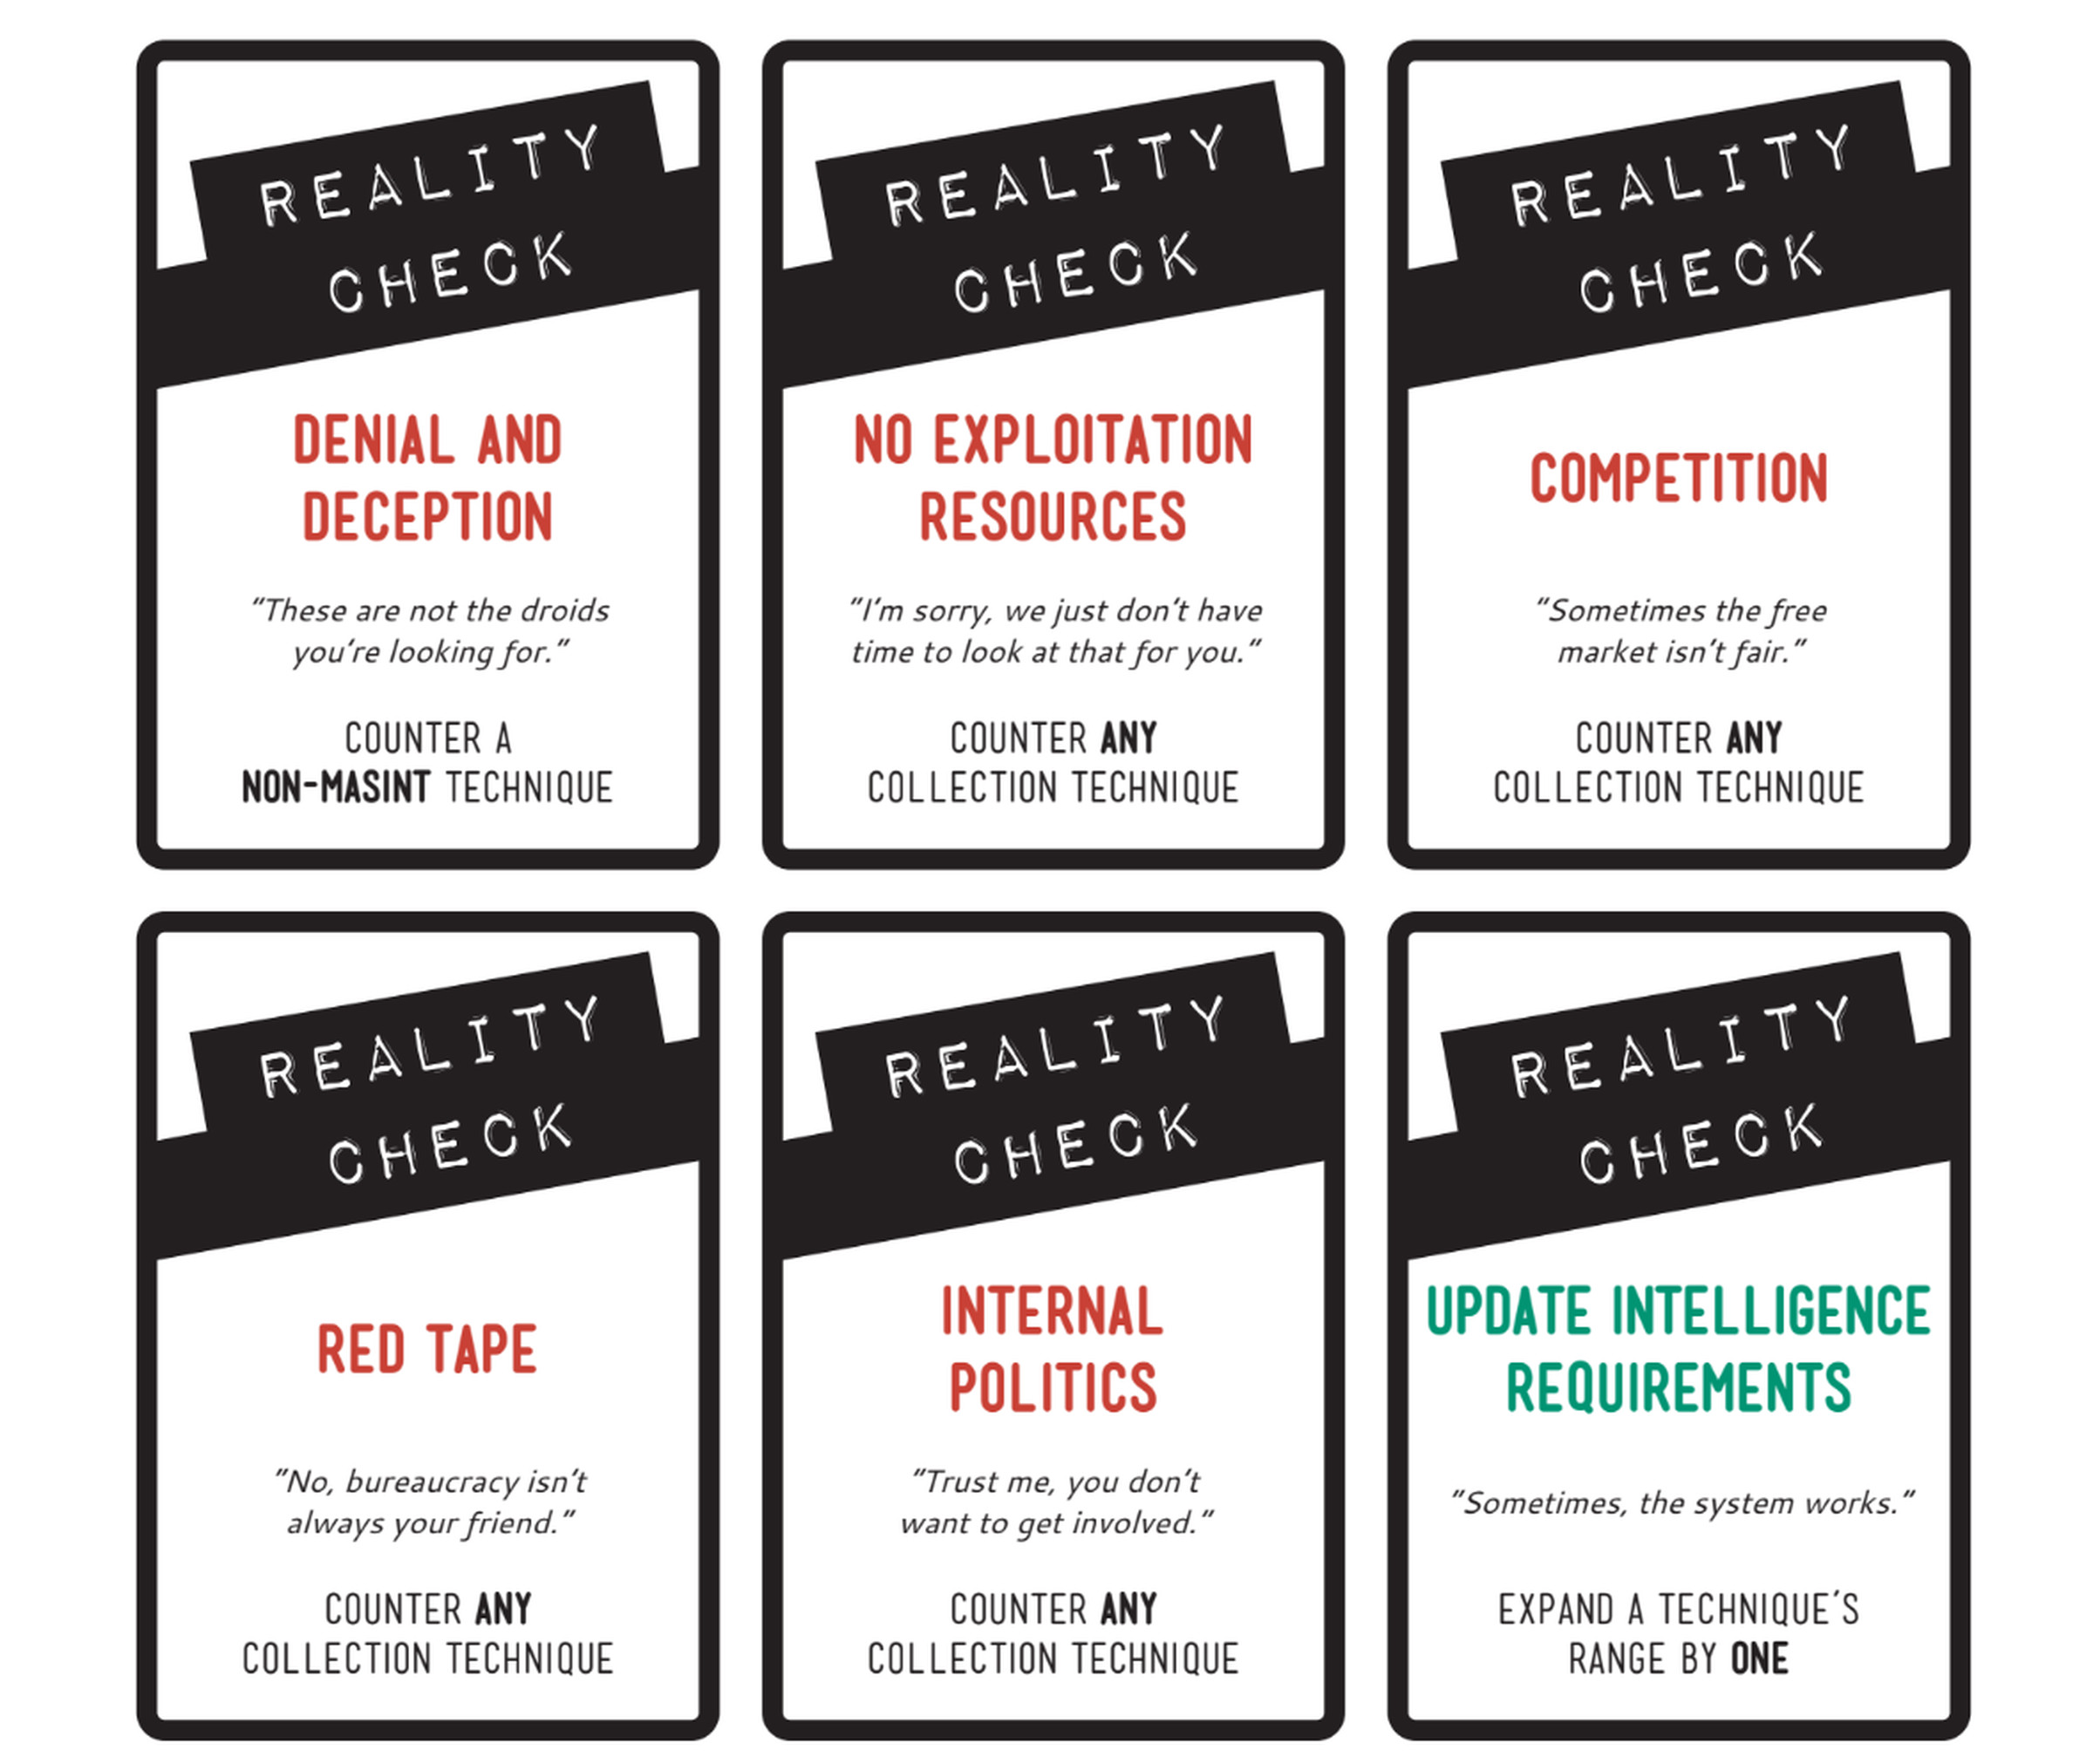 A sample of Reality Check cards.